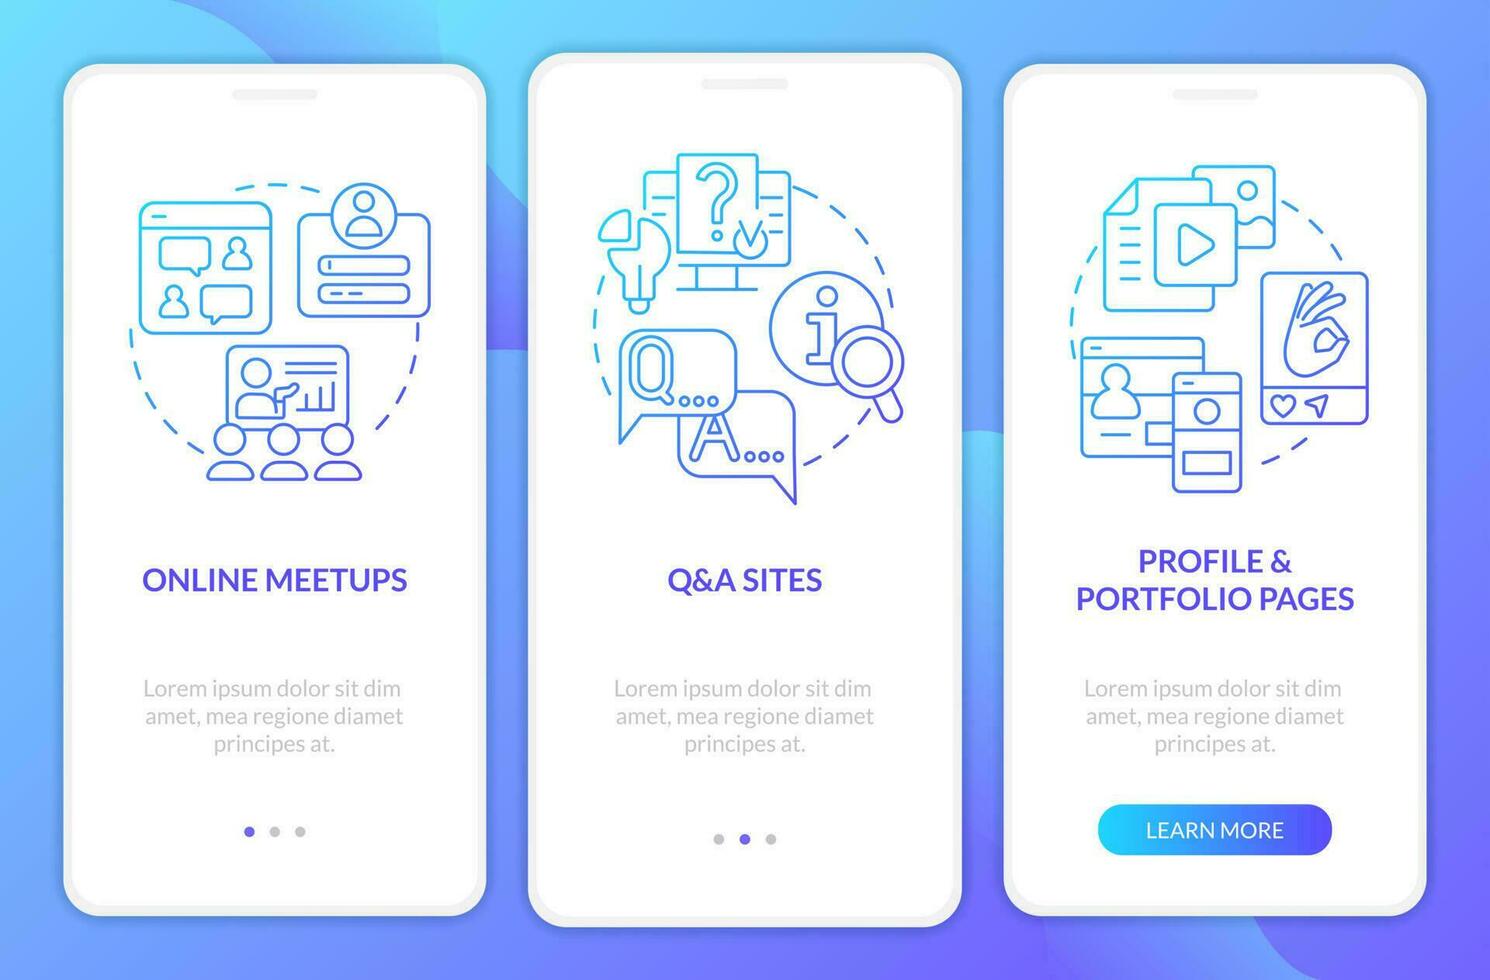 Online networking blue gradient onboarding mobile app screen. Digital marketing walkthrough 3 steps graphic instructions with linear concepts. UI, UX, GUI template vector